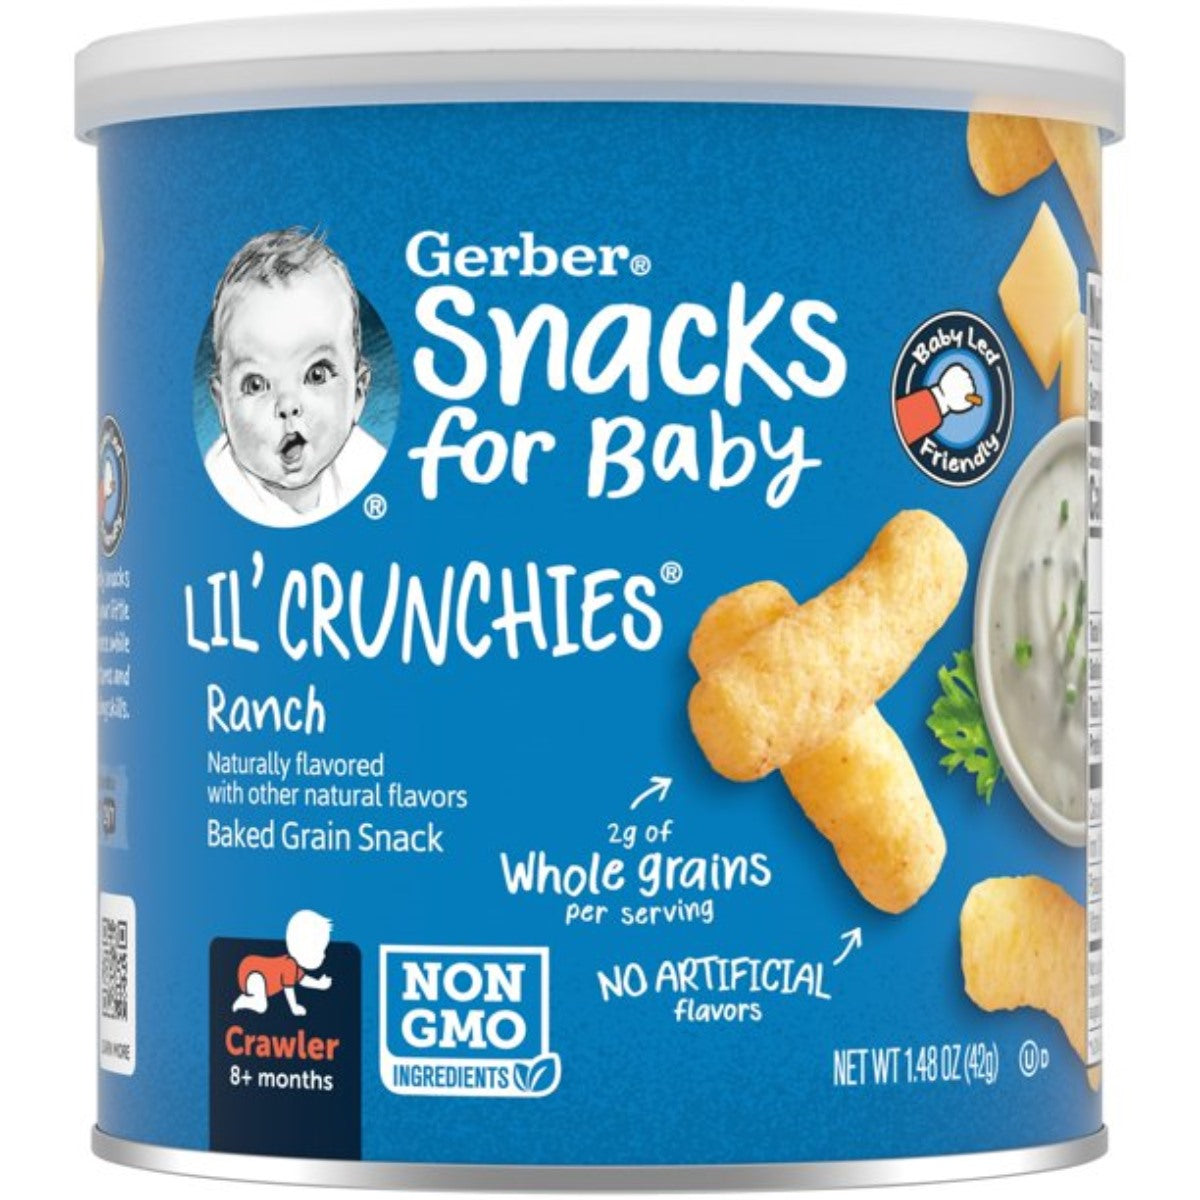 Gerber Snacks for Baby, Lil Crunchies (1.48oz) - Ranch